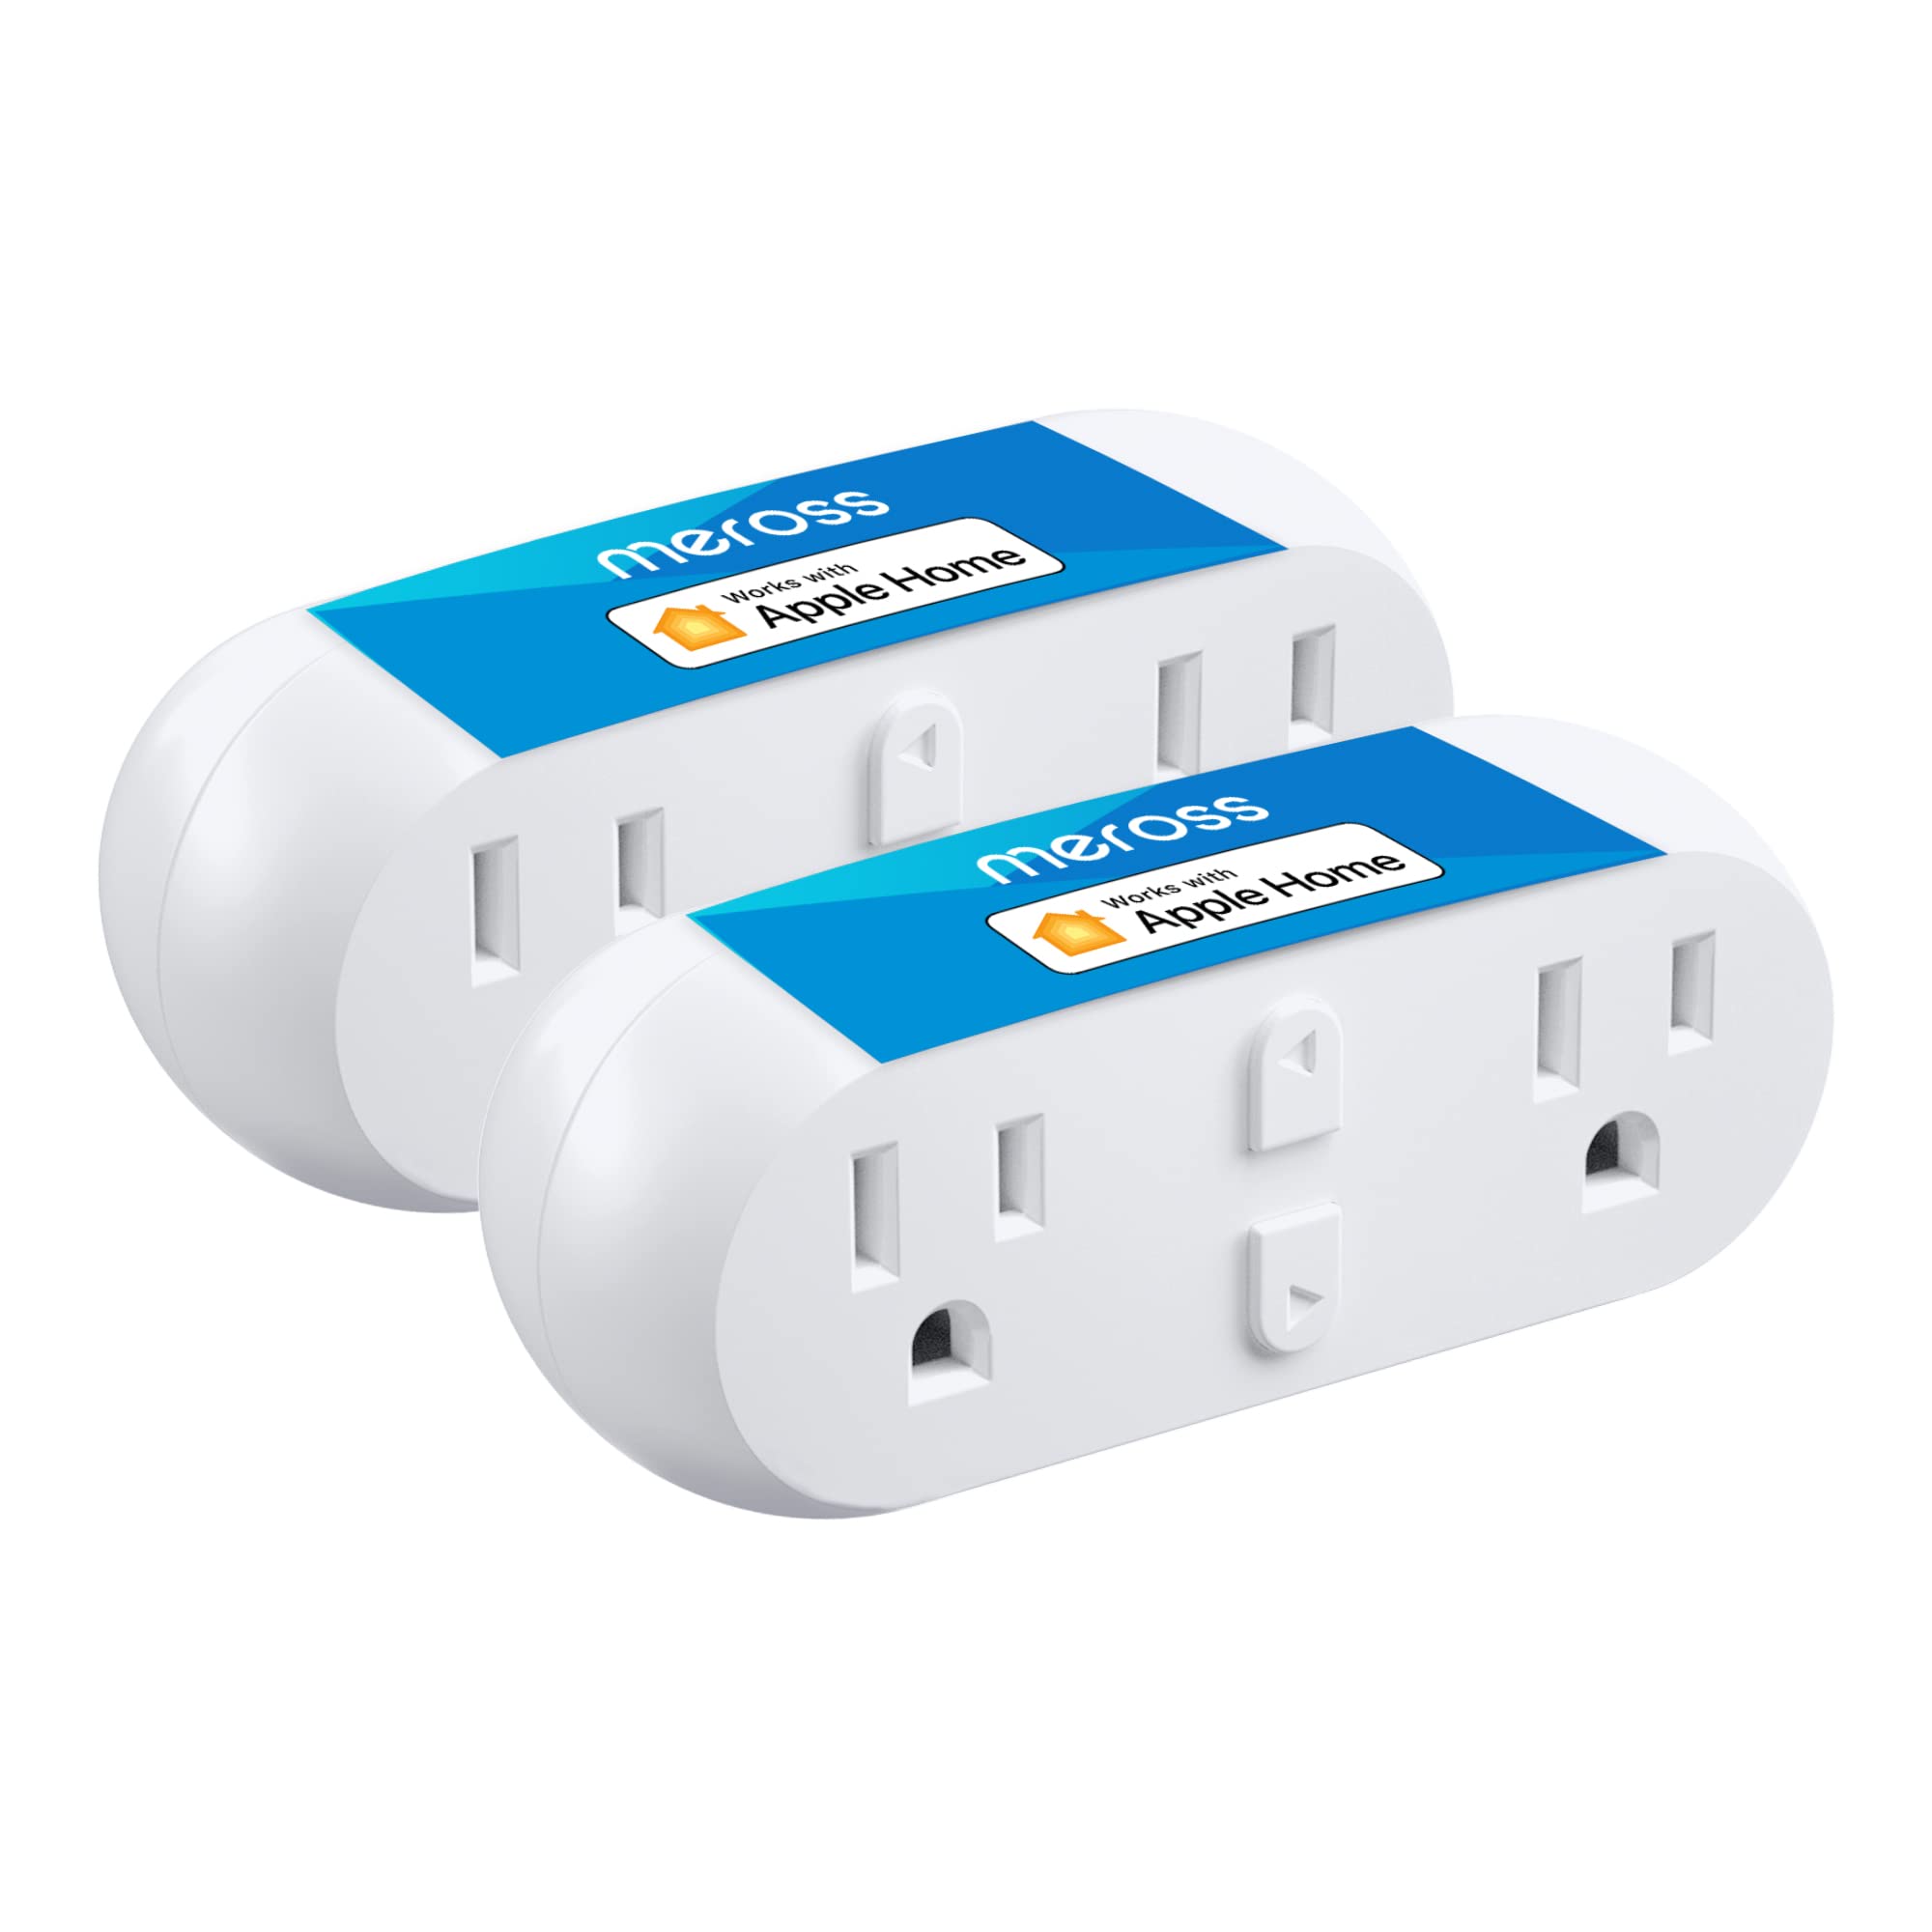 Meross WiFi Dual Smart Plug 15A Smart Outlet Supports Apple HomeKit, Siri, Alexa, Echo and SmartThings, 2 in 1, Voice & Remote Control, Timer, No Hub Required, 2.4G, 2 Pack